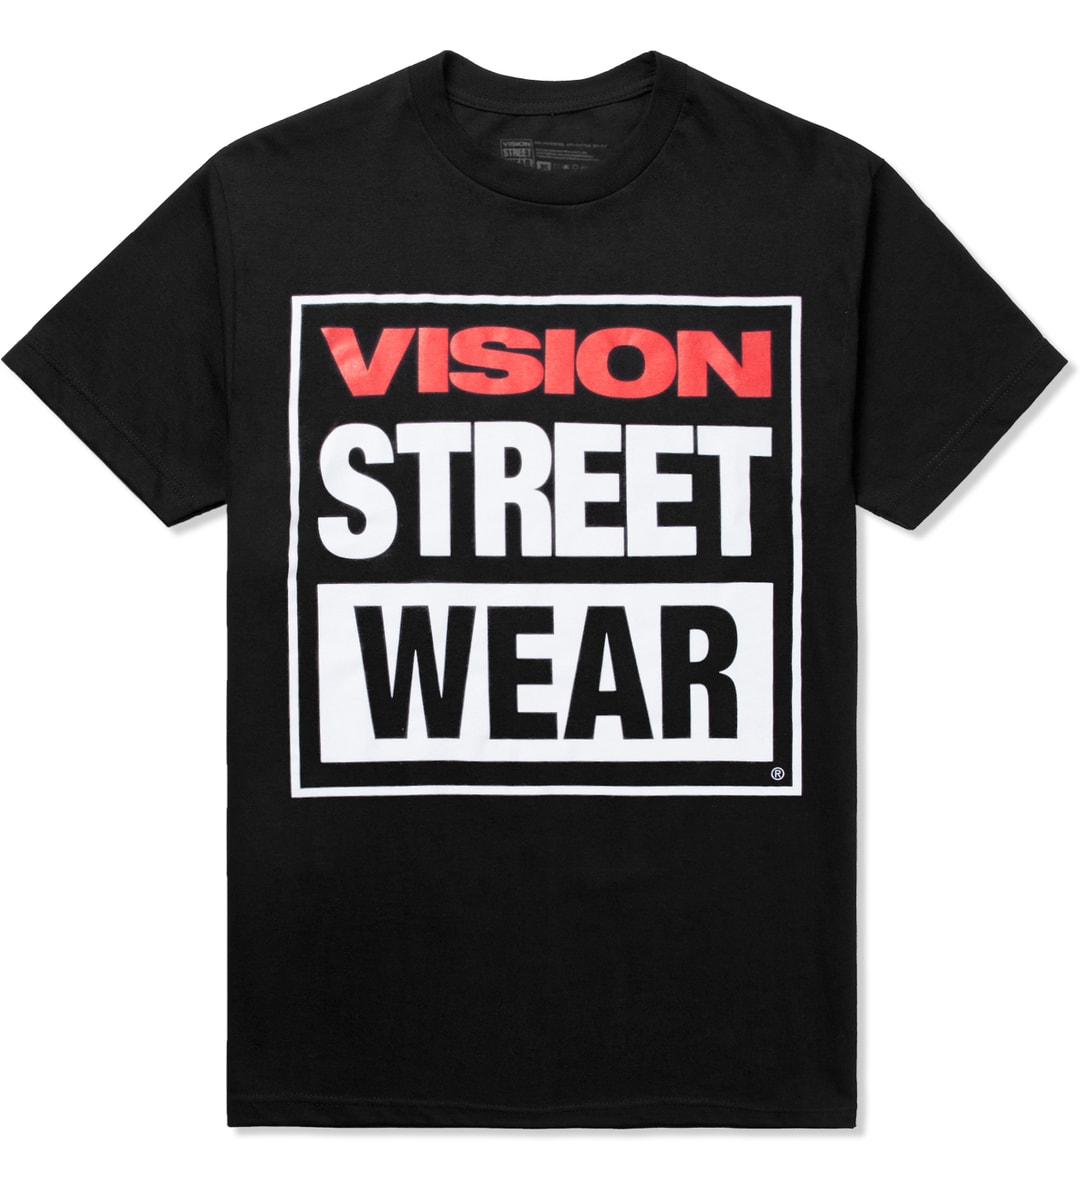 VISION STREET WEAR - Black Logo T-Shirt | HBX - Globally Curated Fashion and Lifestyle Hypebeast